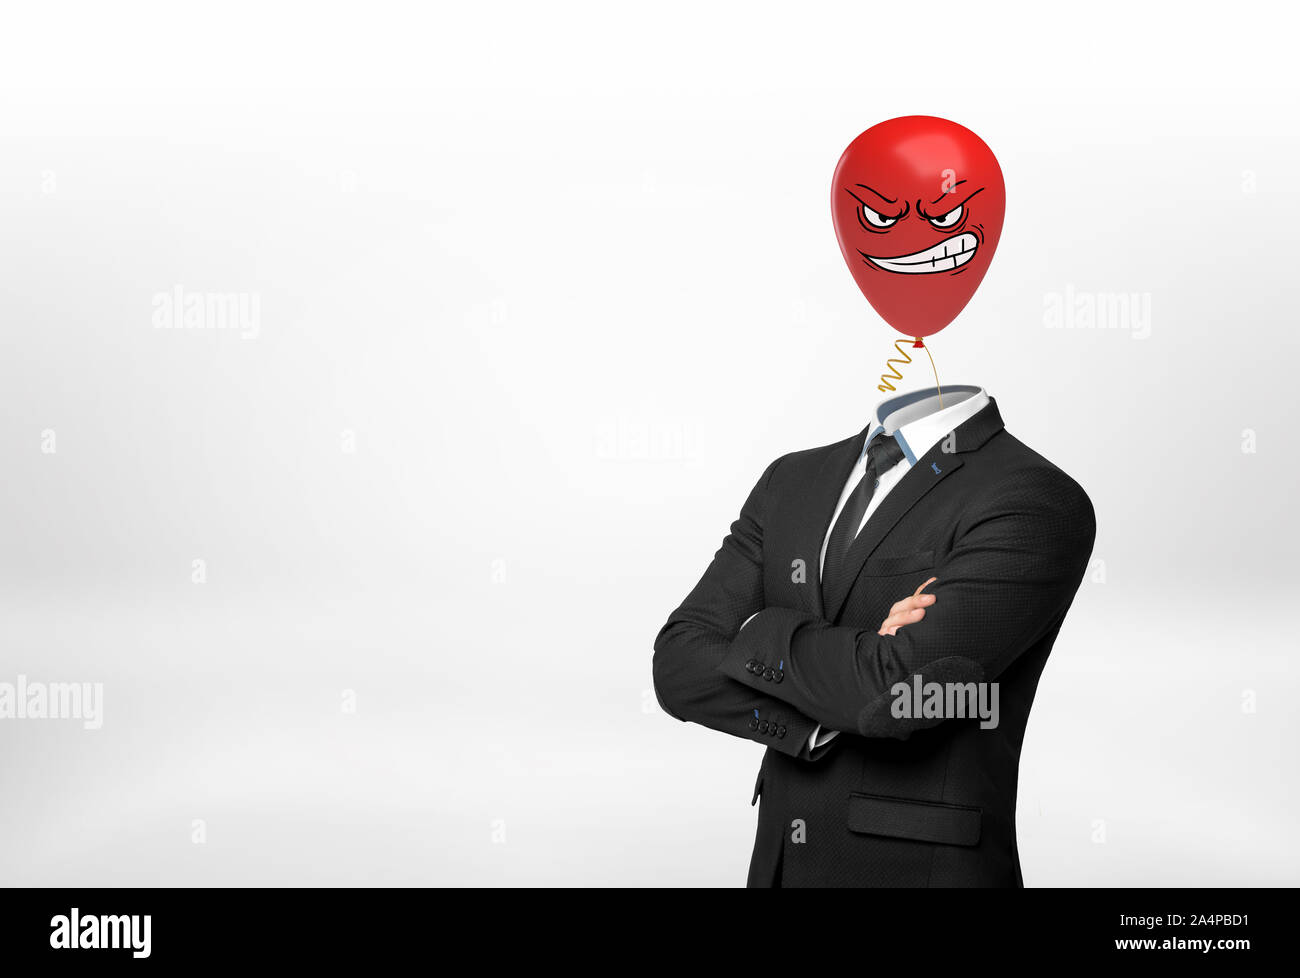 A businessman on white background stands with crossed hands and a red angry face balloon instead of his head. Stock Photo